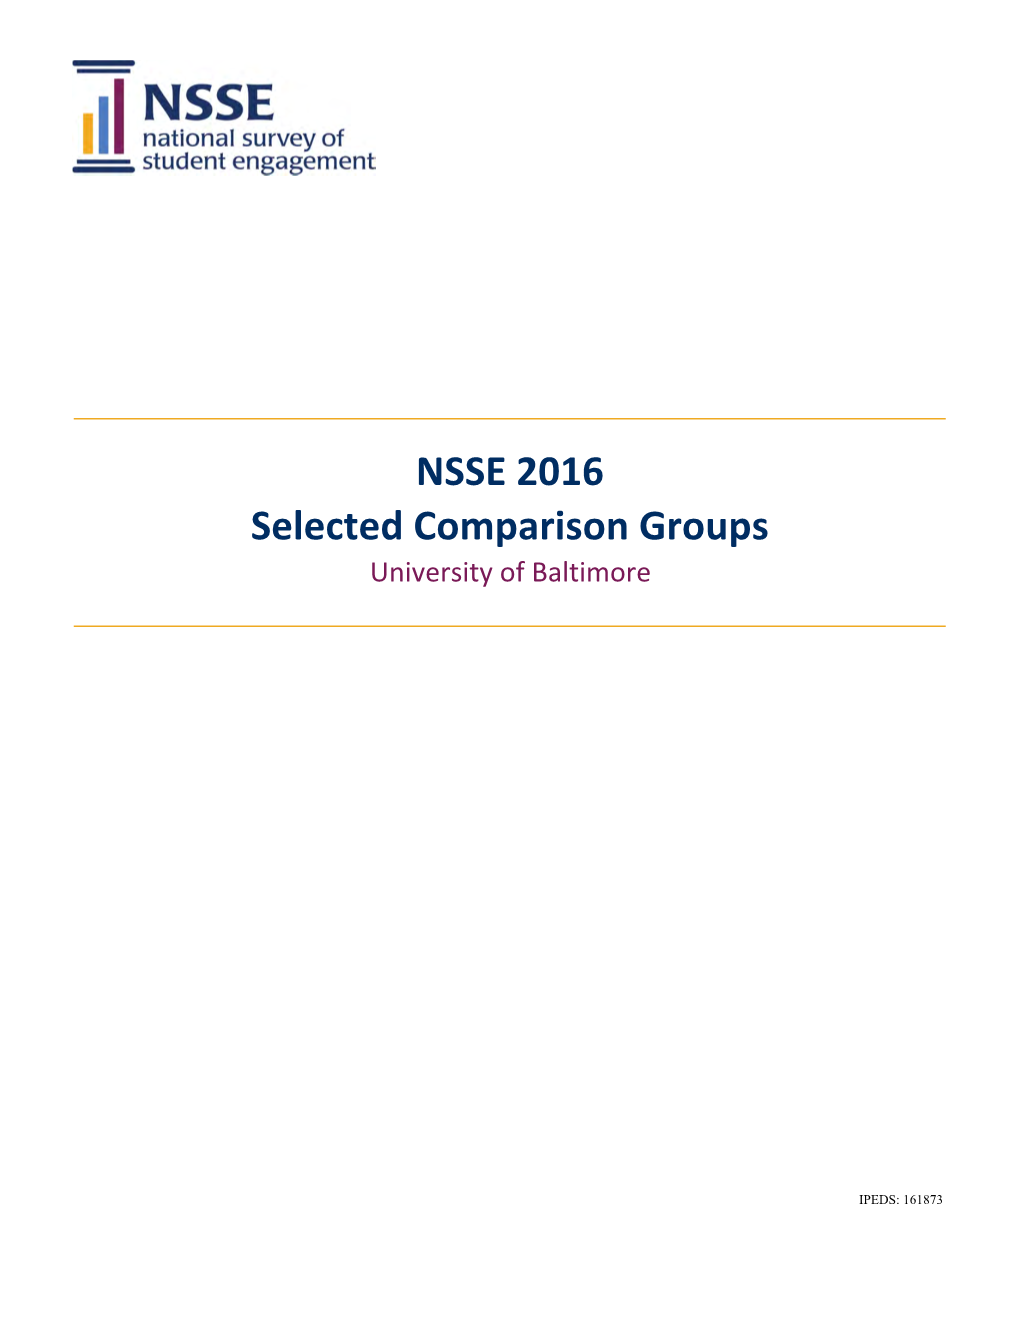 NSSE 2016 Selected Comparison Groups Report